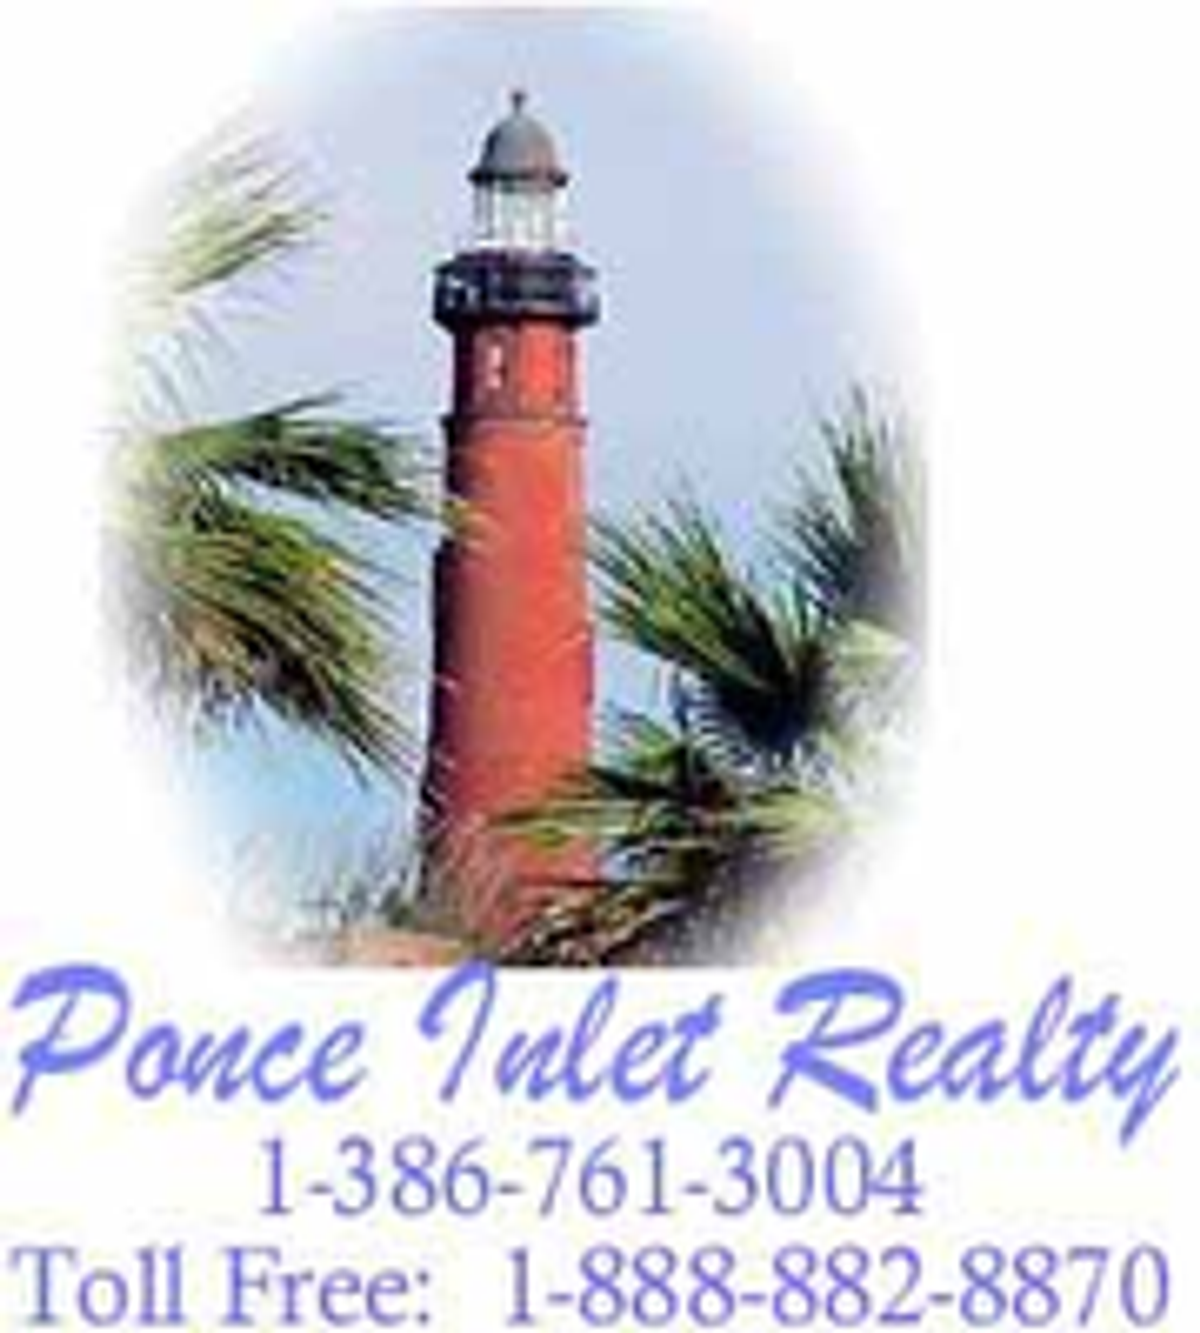 Photo for Don Whitfield, Listing Agent at Ponce Inlet Realty, Inc